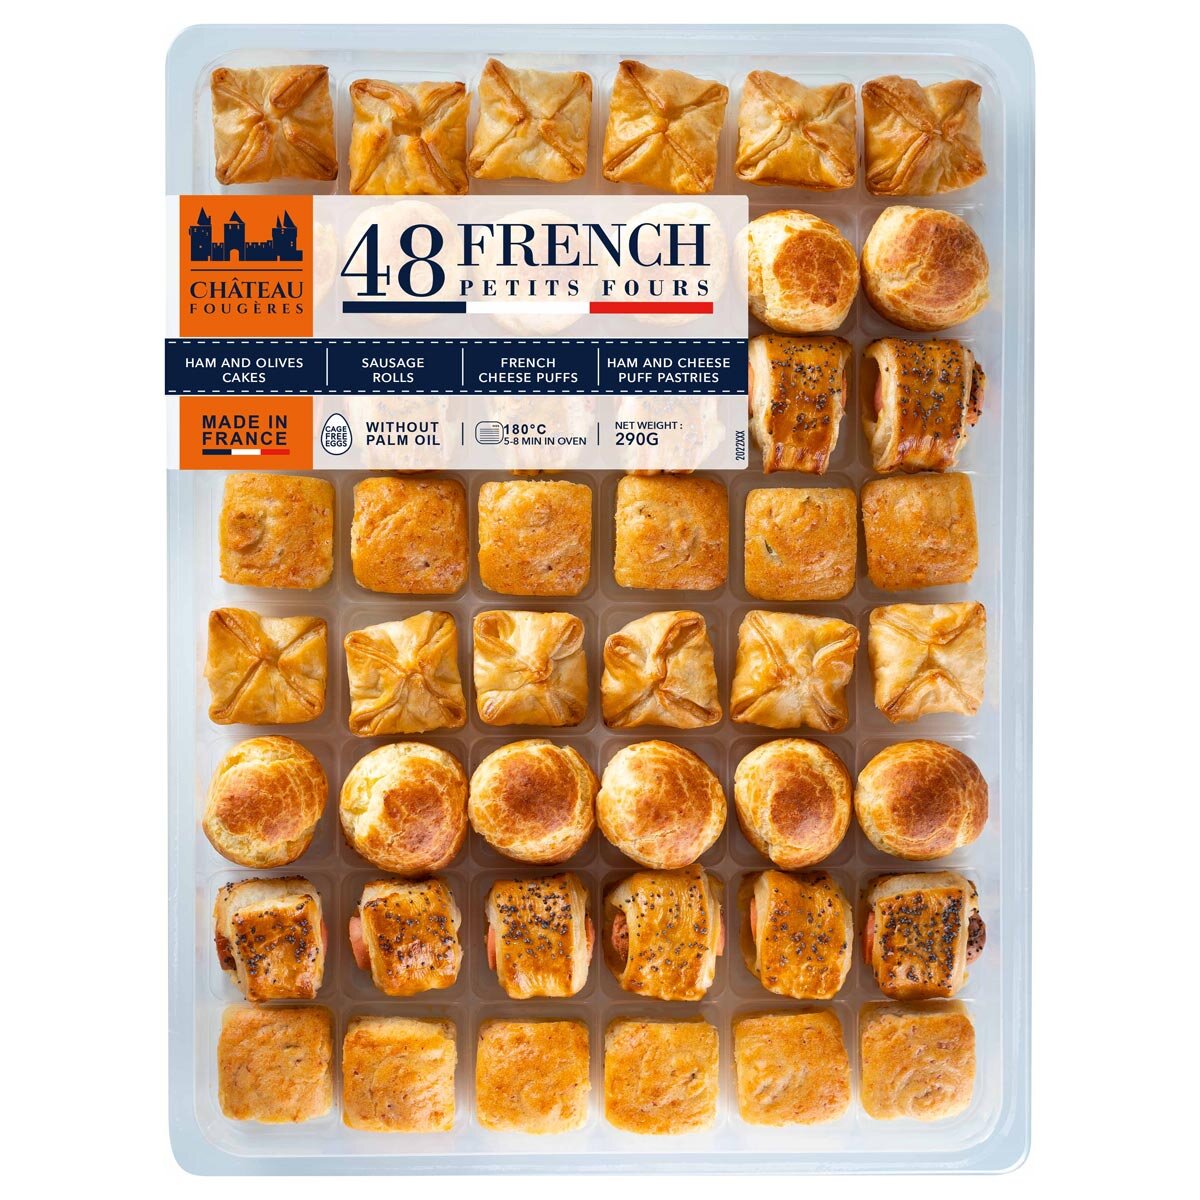 Chateau Fougeres 48 French Petit Fours, 690g